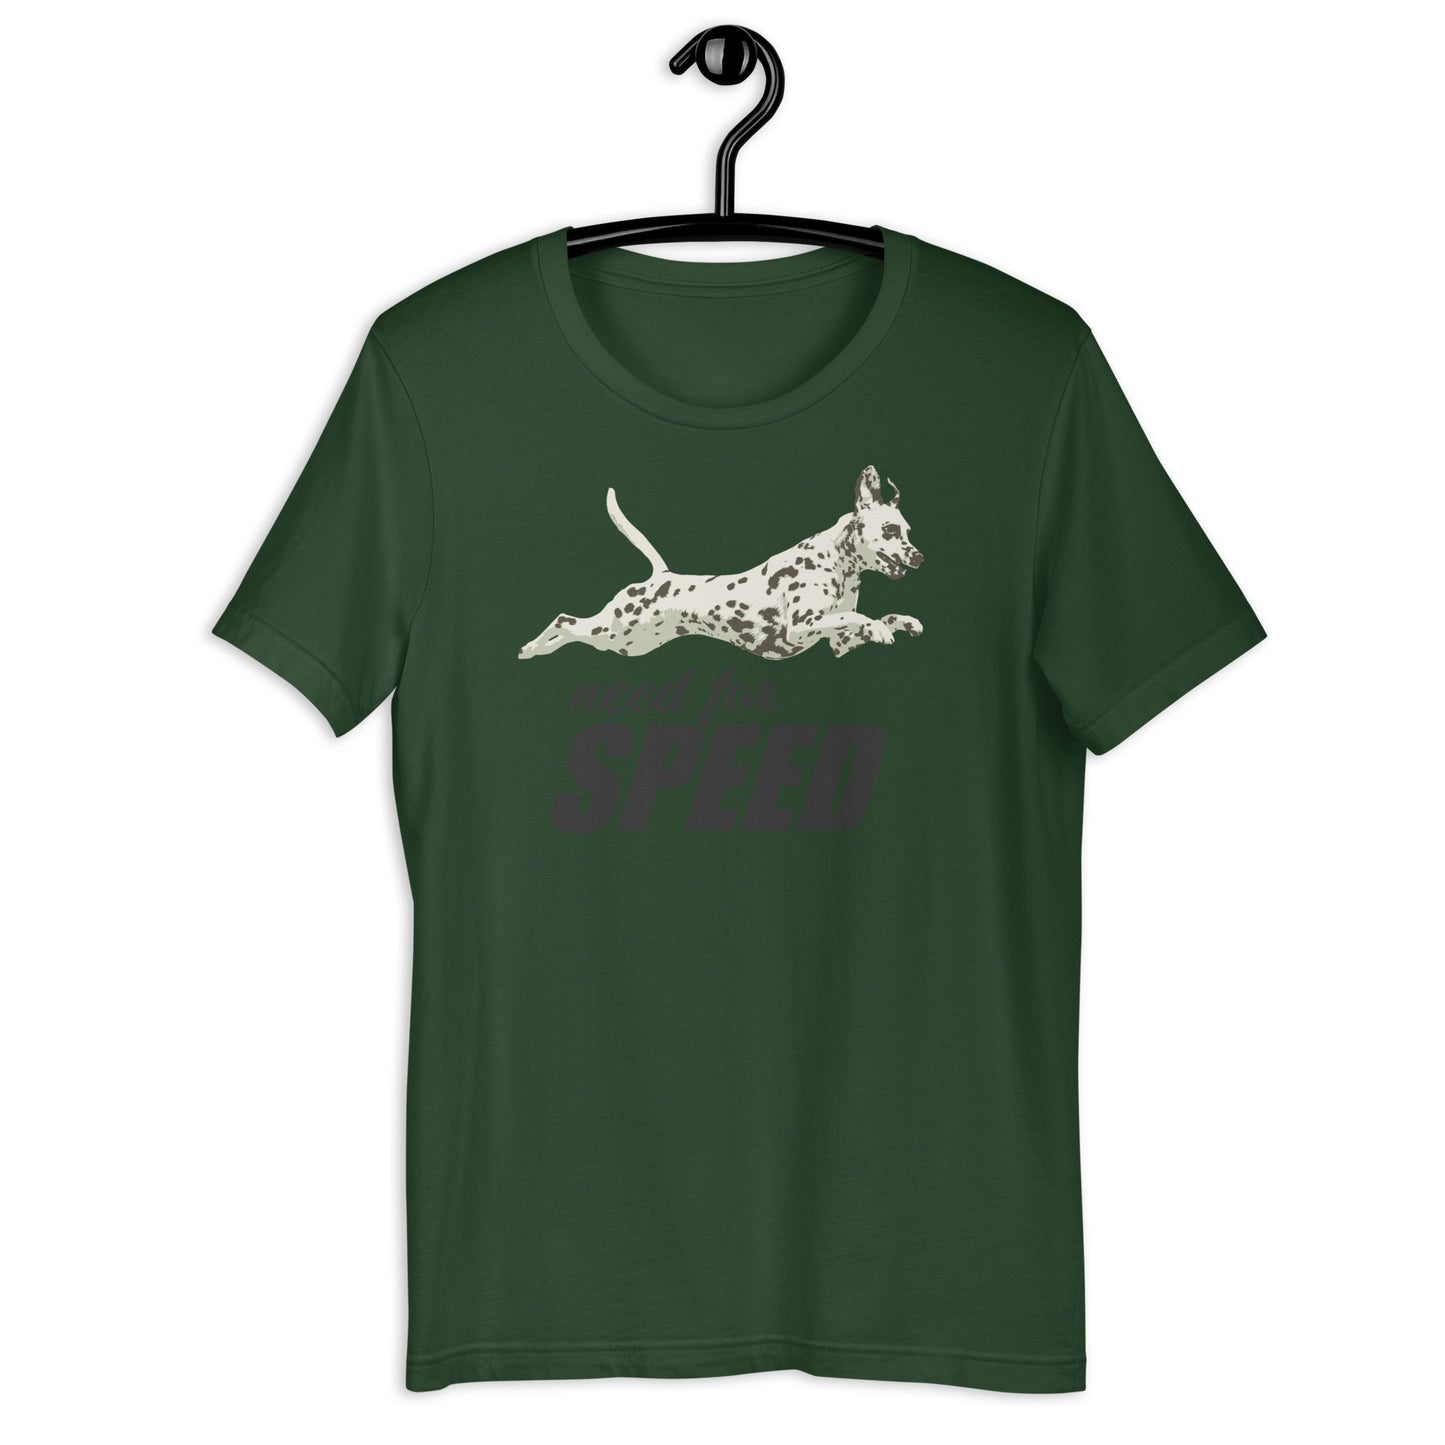 NEED FOR SPEED - Dalmatian - Unisex t-shirt